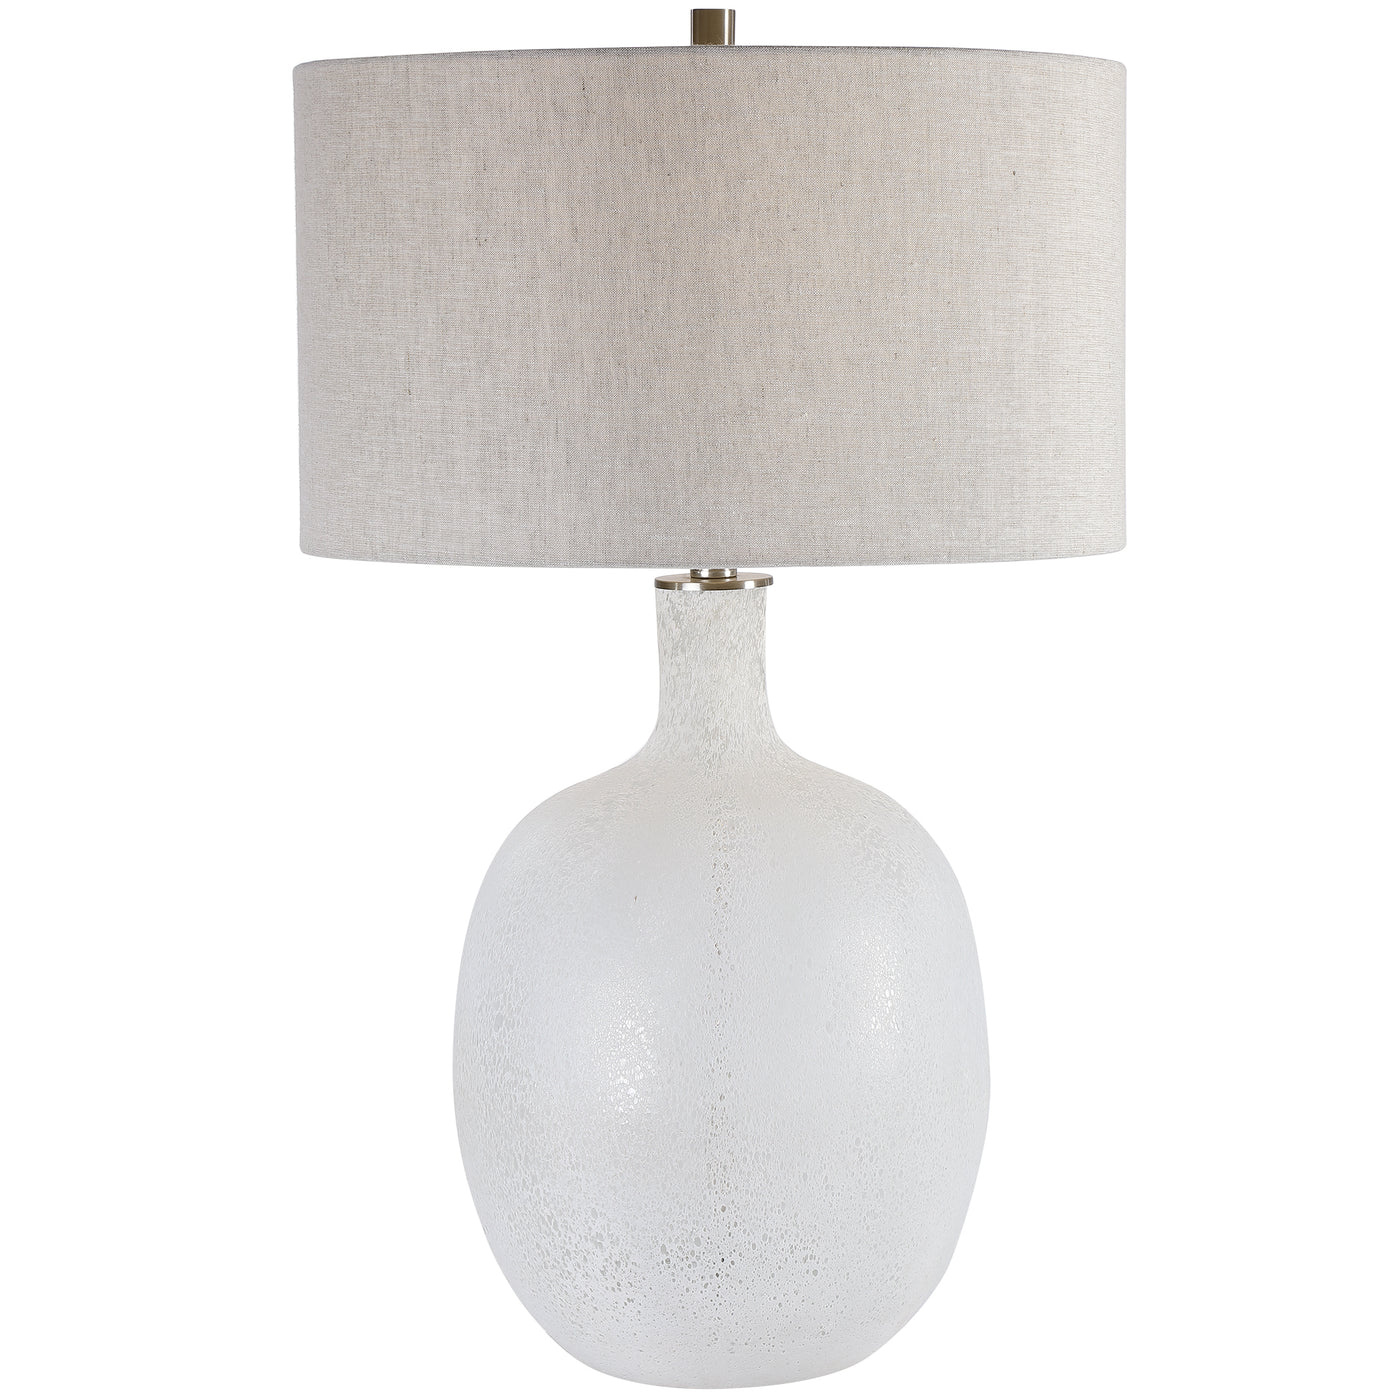 Beautiful And Functional, This Table Lamp Features A Glass Base Finished In A Heavily Textured, Mottled Aged White, Accent...